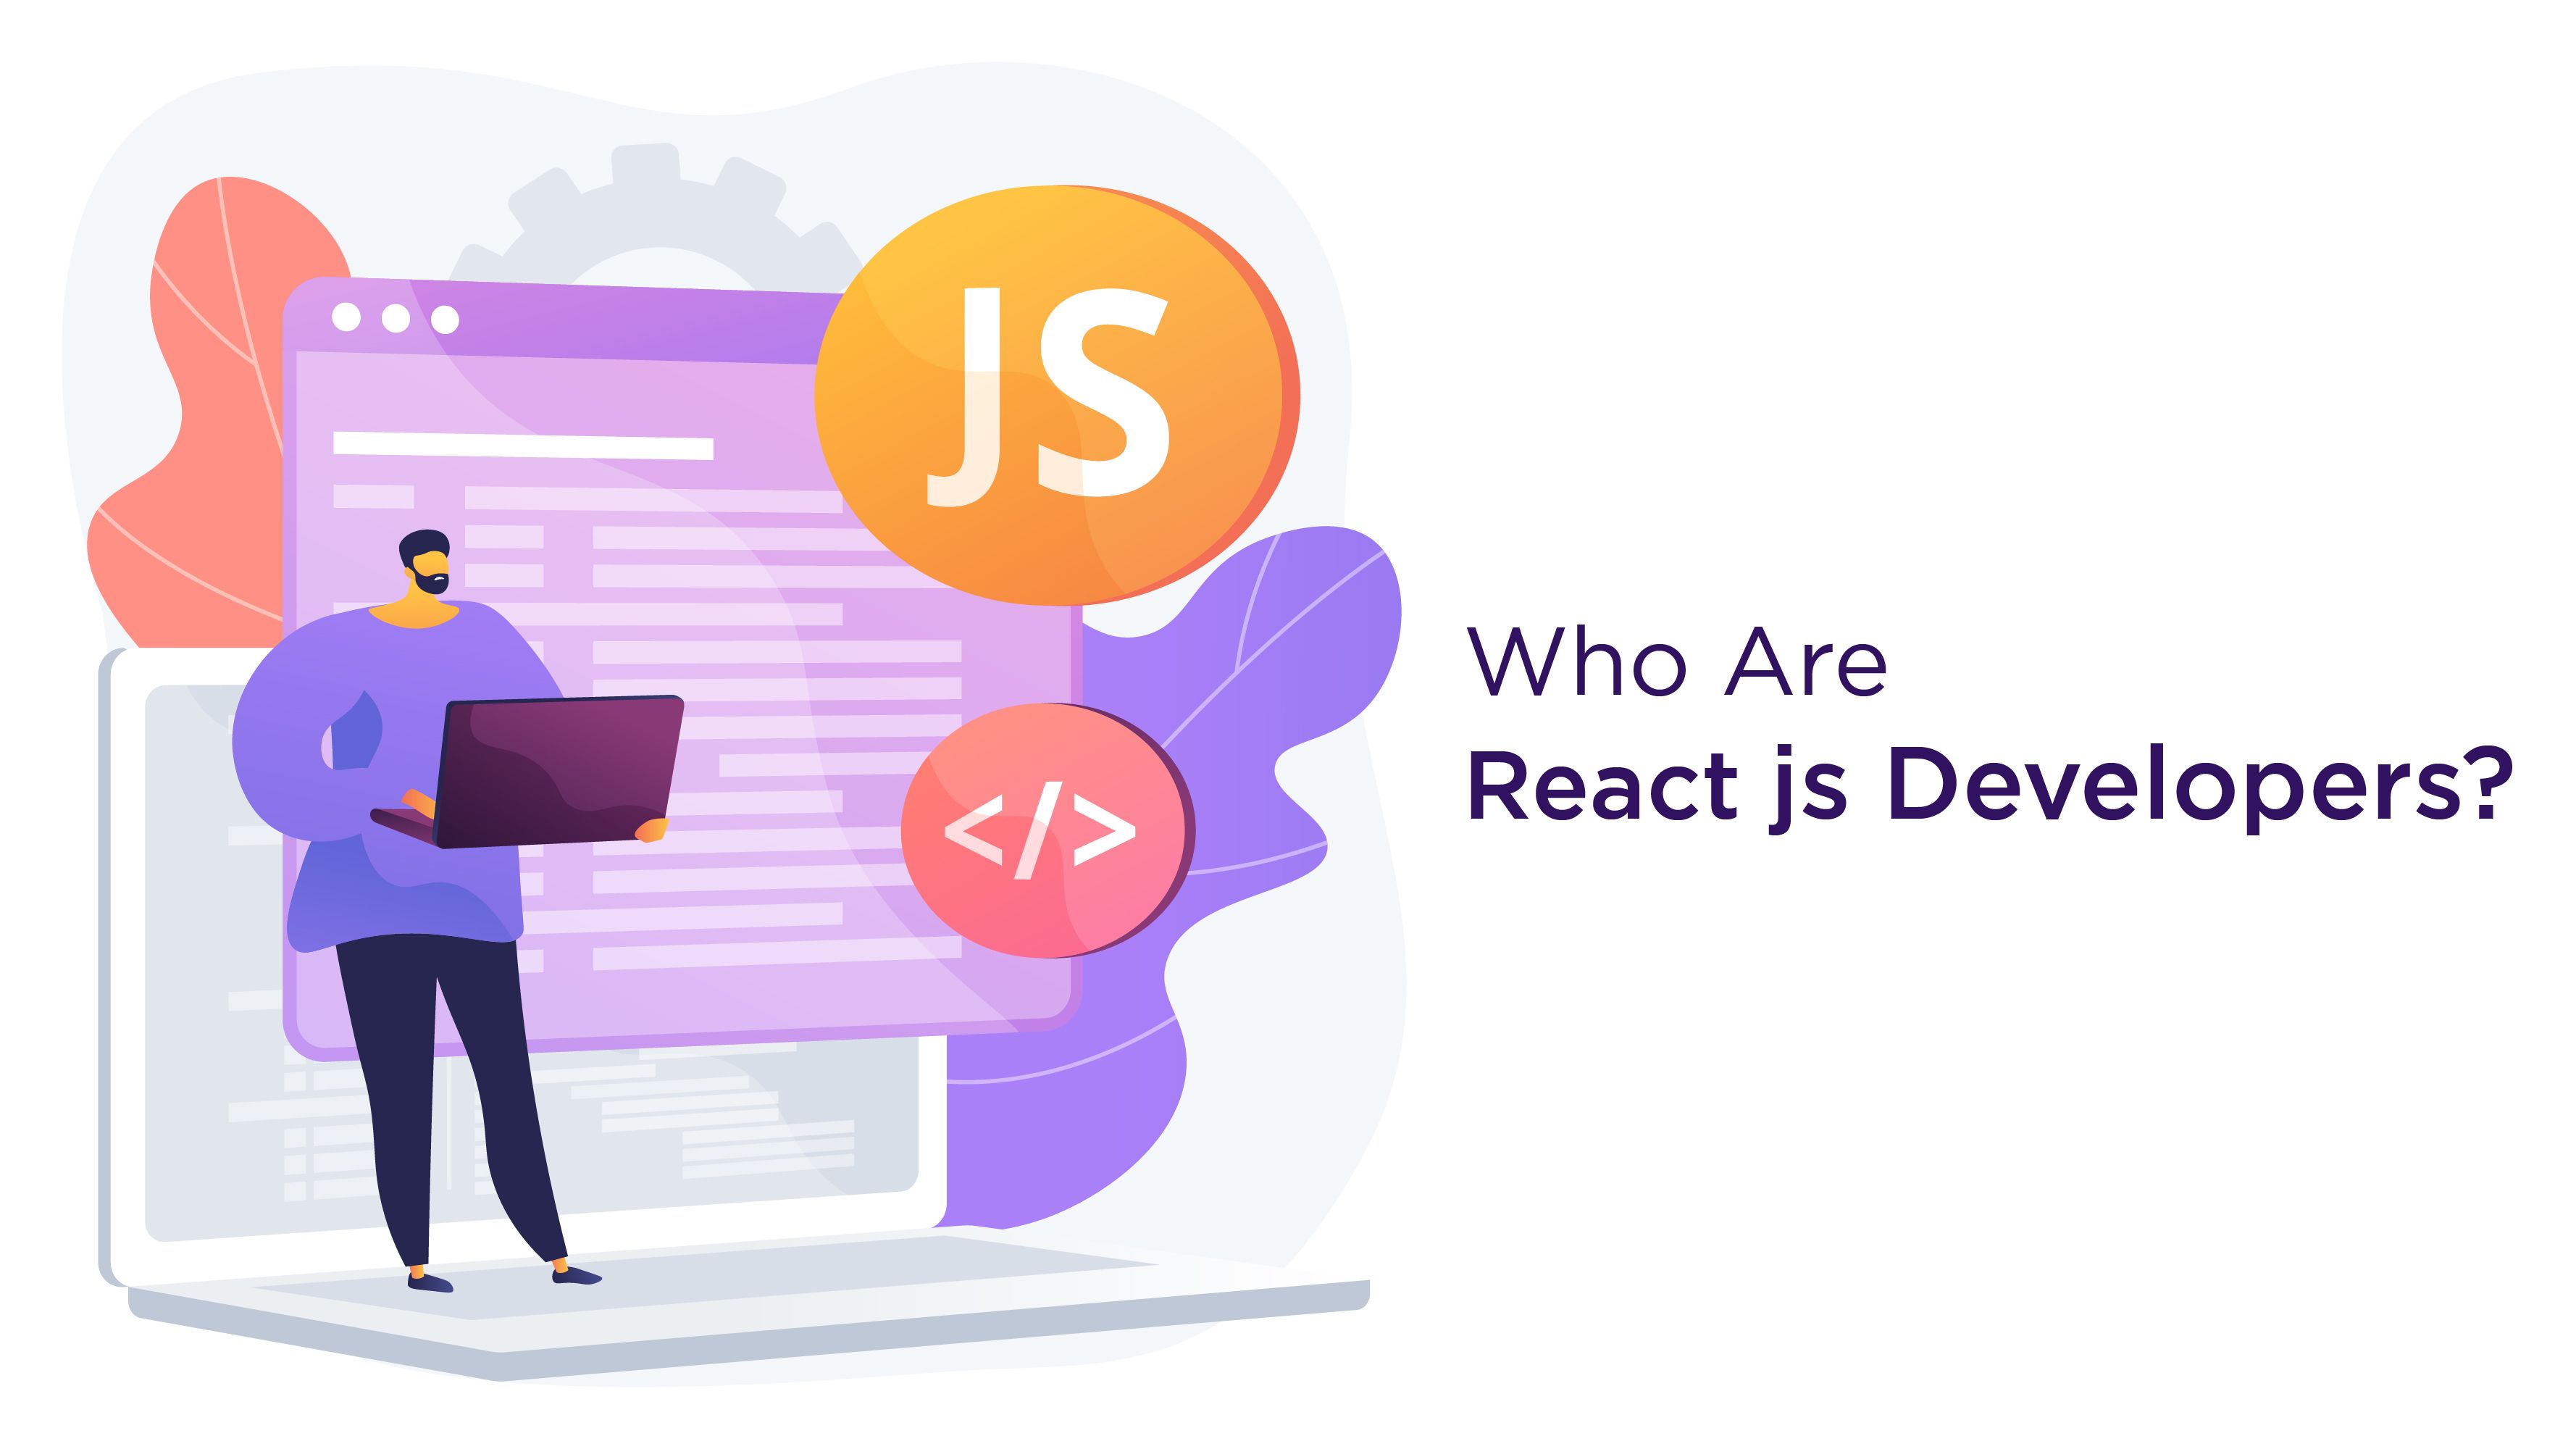 Who Are React js Developers?